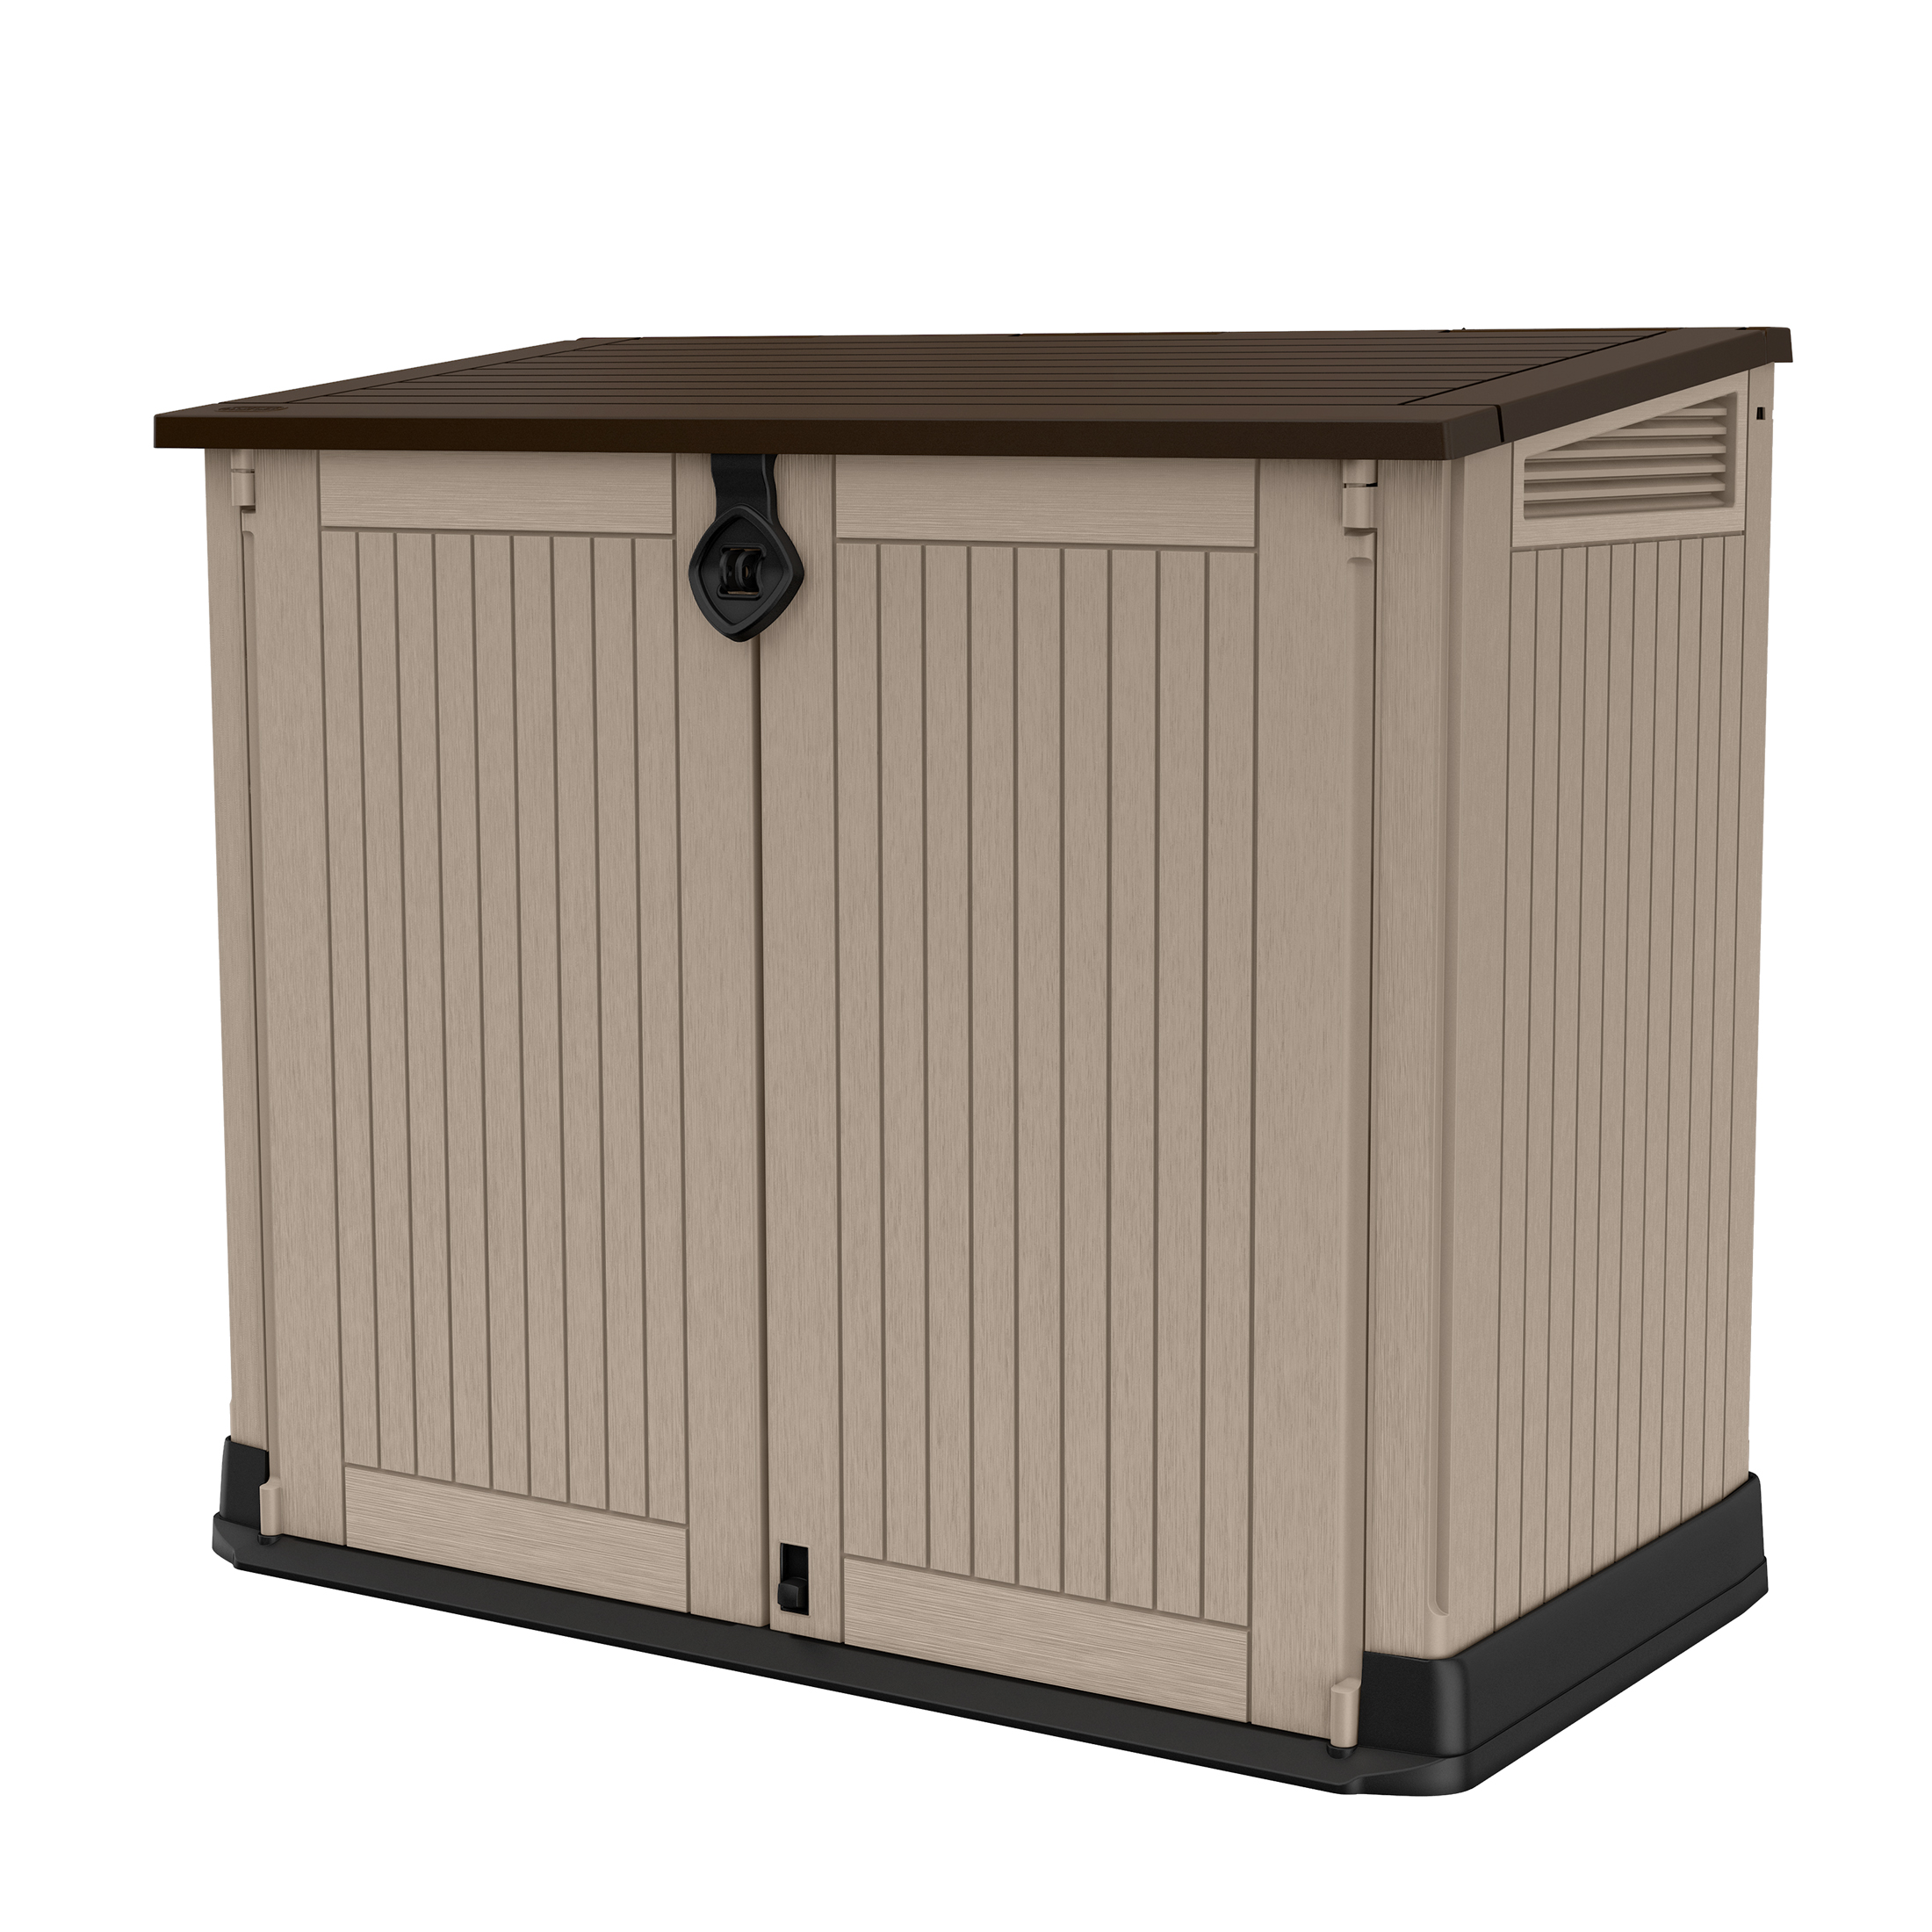 Keter Store-It-Out Midi 30 Cubic Foot All-Weather Resin Storage Shed, Beige - image 1 of 12